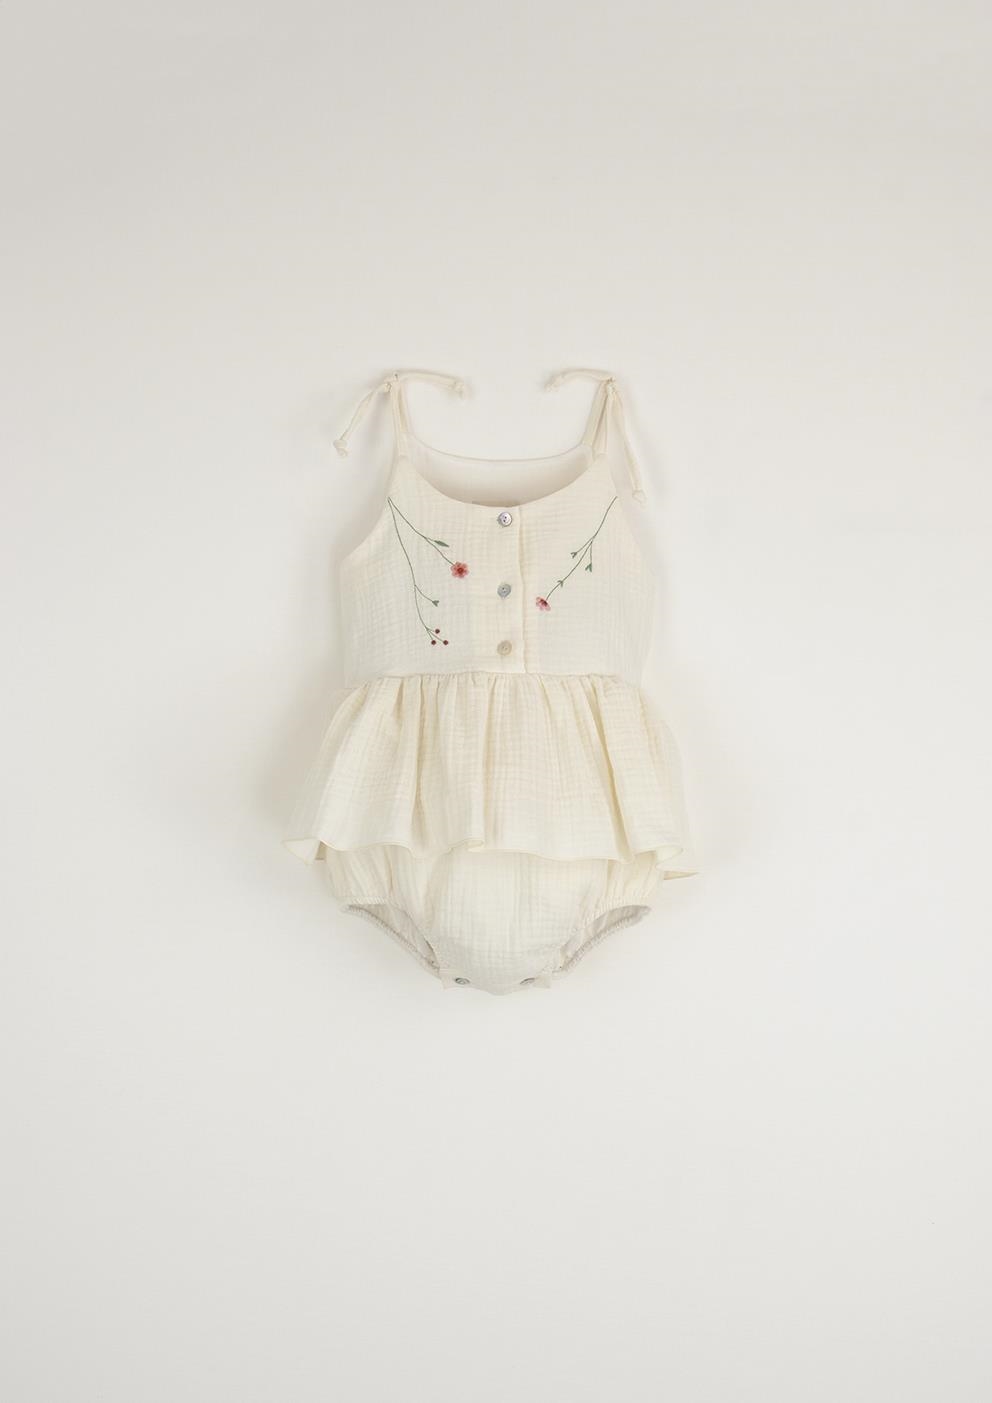 Mod.10.1 Off-white organic romper suit with straps | SS23 Mod.10.1 Off-white organic romper suit with straps